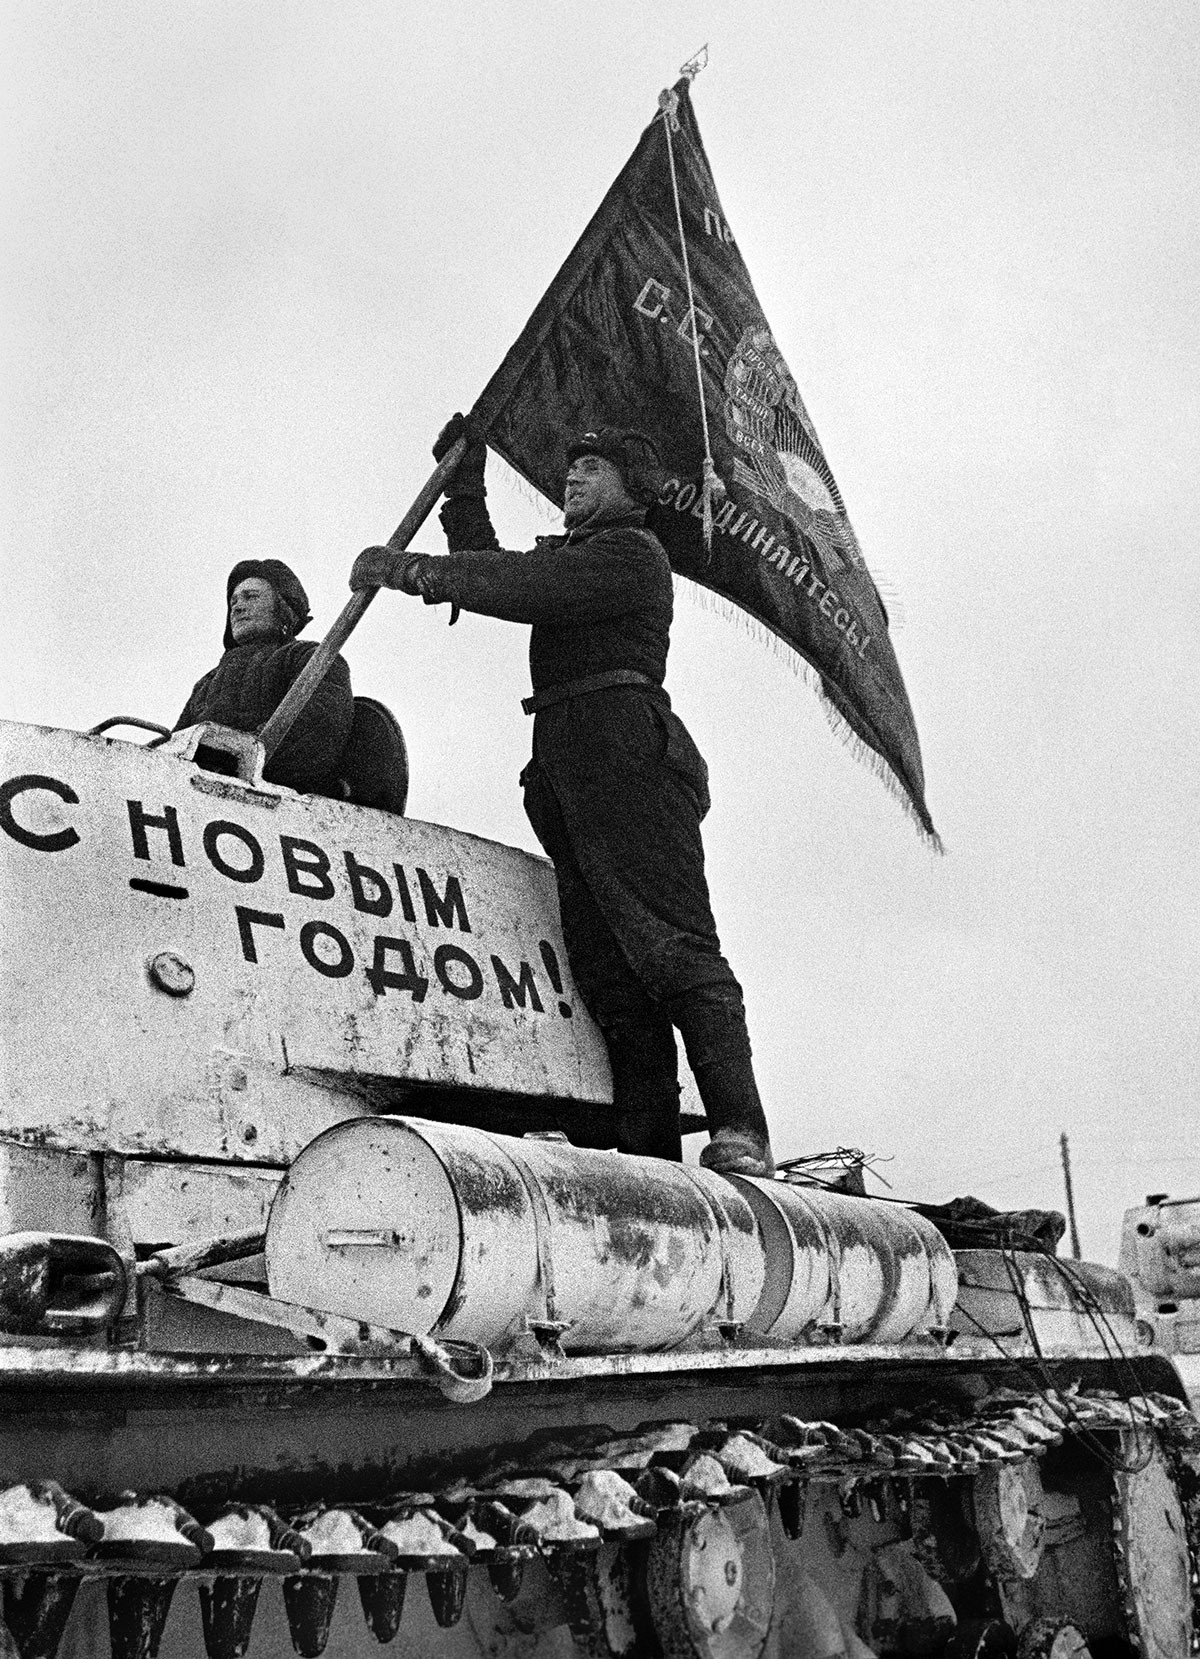 The New Year on the Eastern front of World War II, 1941